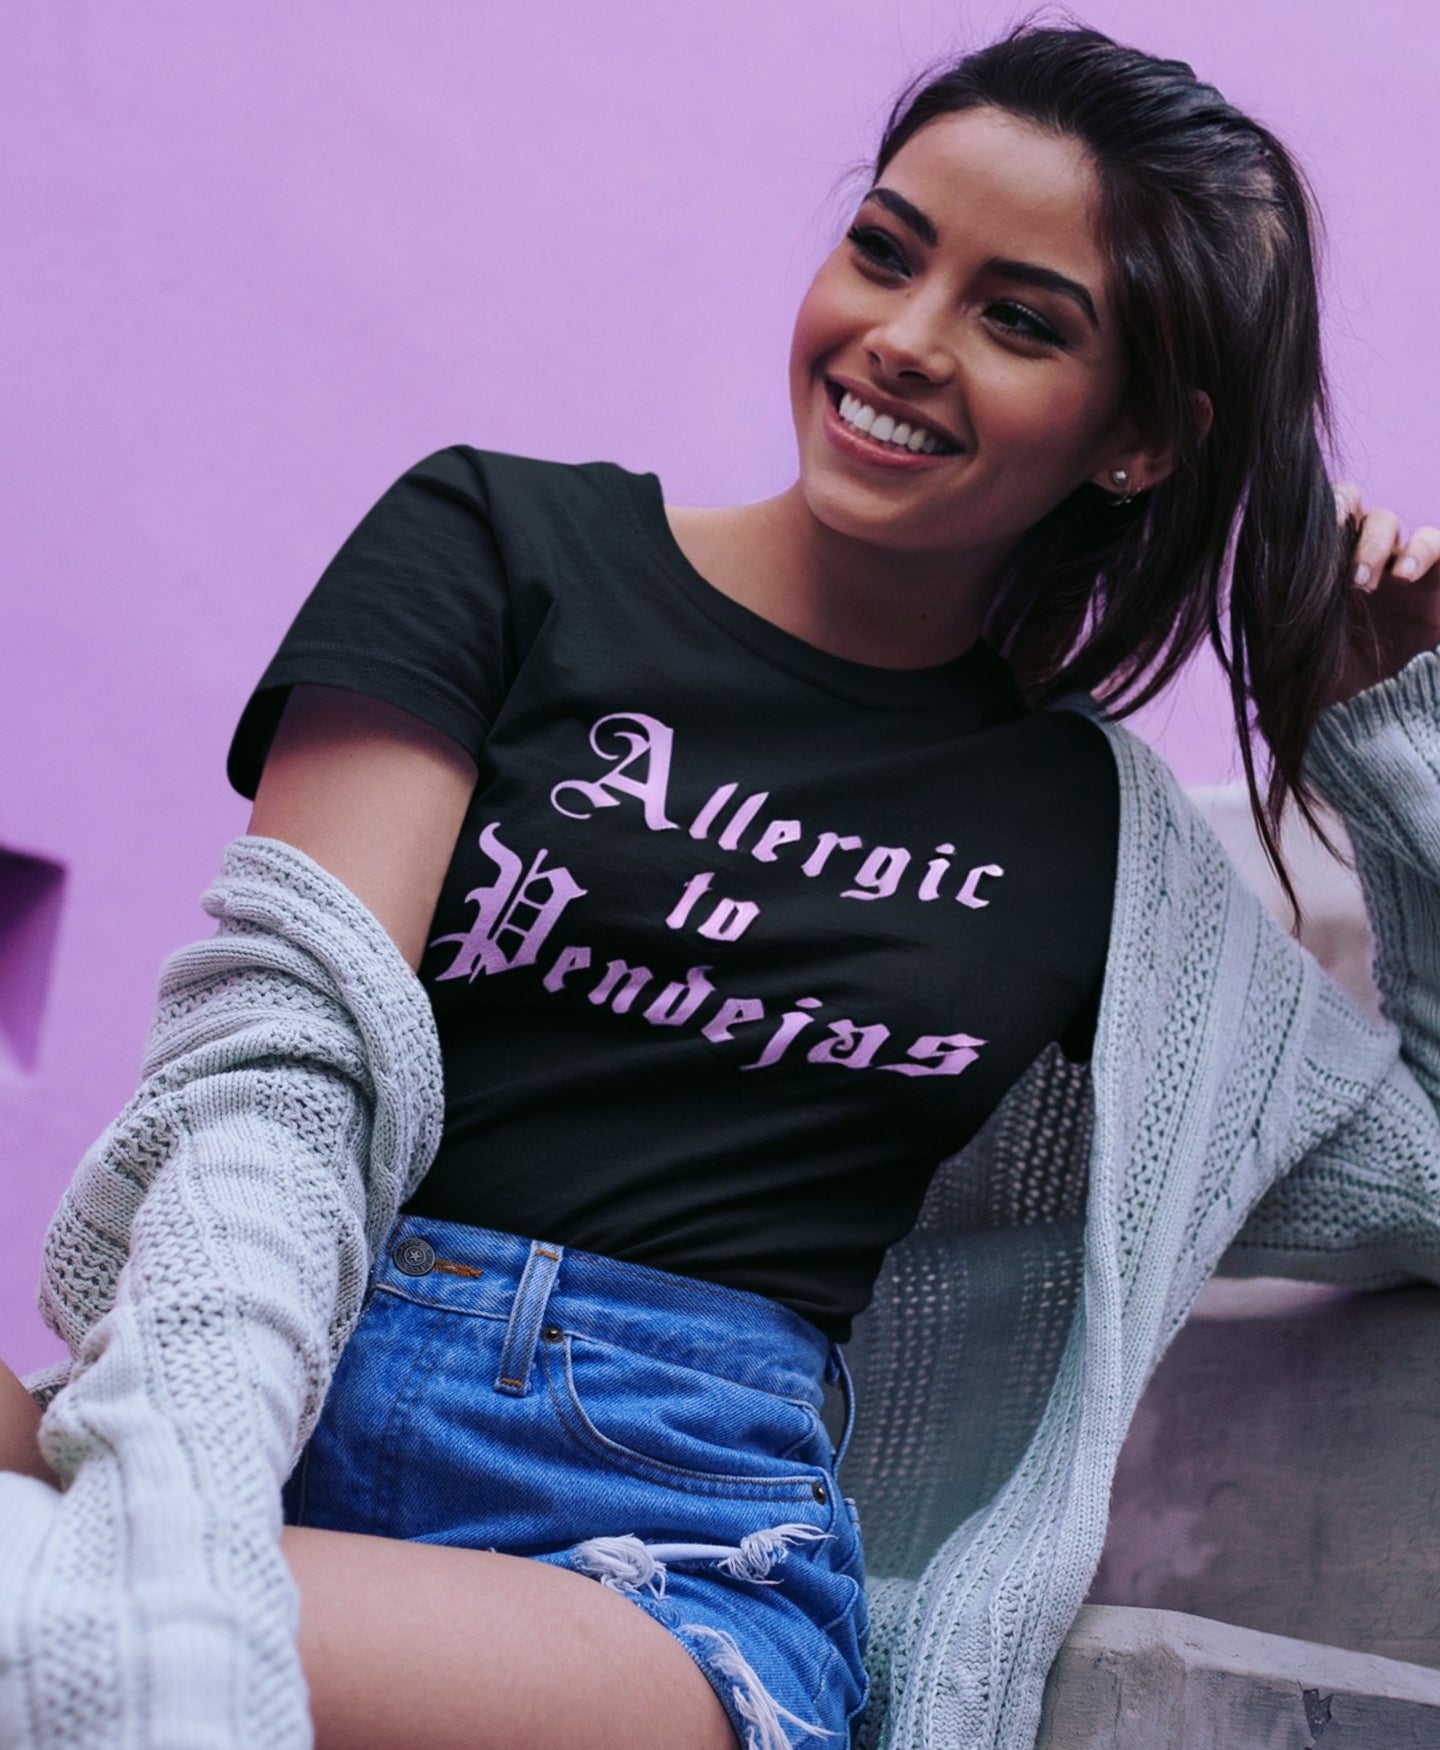 Latina woman in funny black t-shirt with pink old english lettering that says ALLERGIC TO PENDEJAS